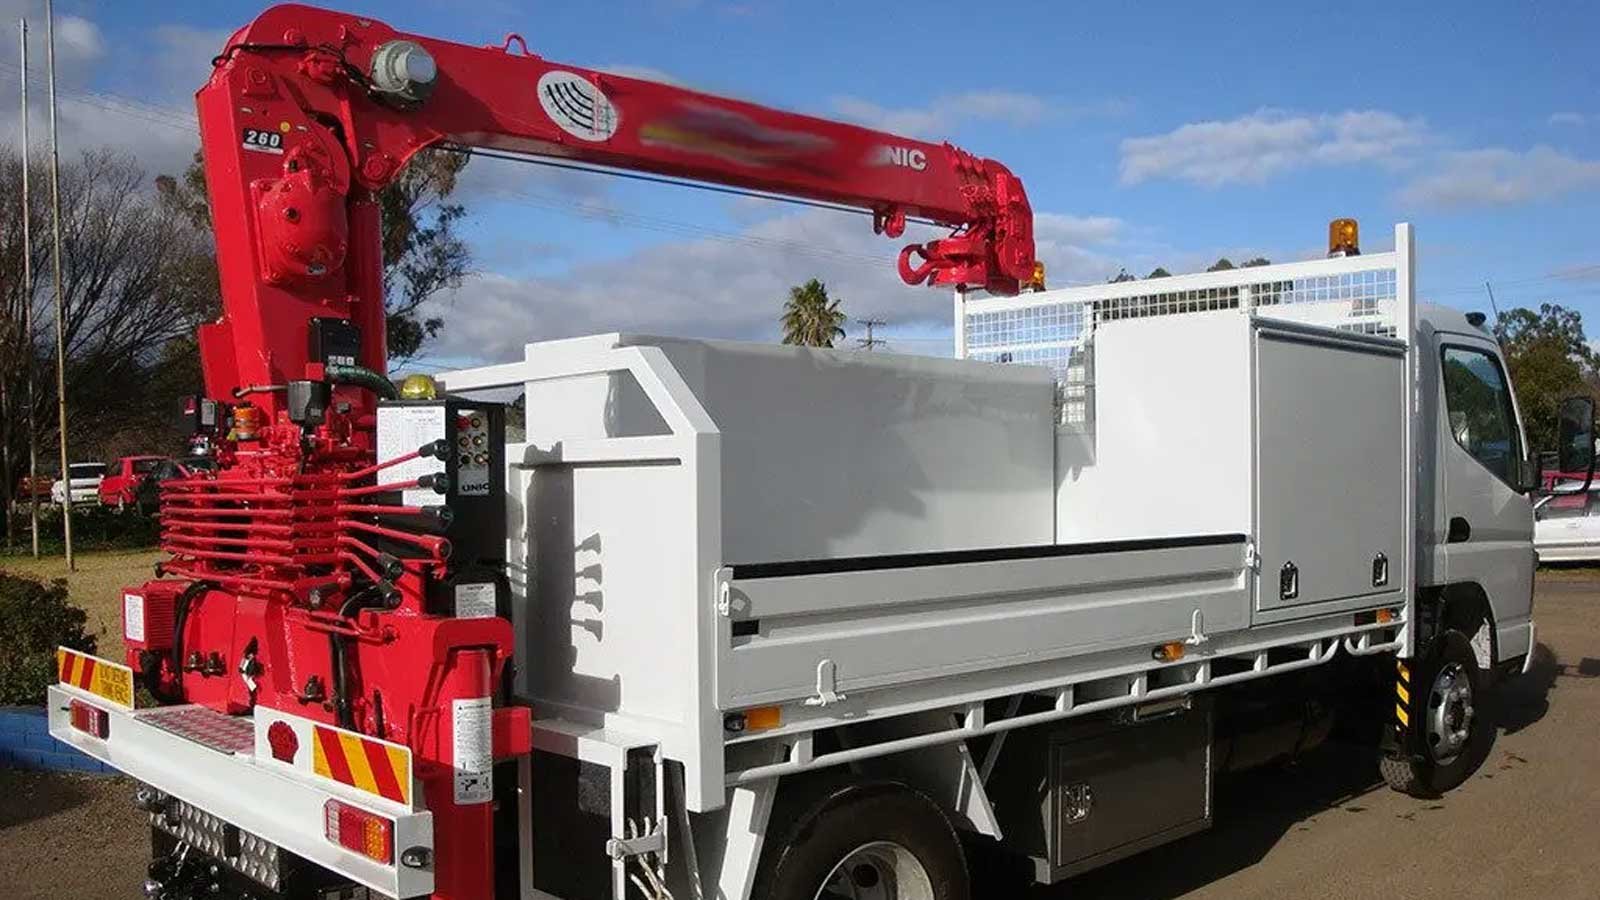 Heavy vehicle with red crane attachment